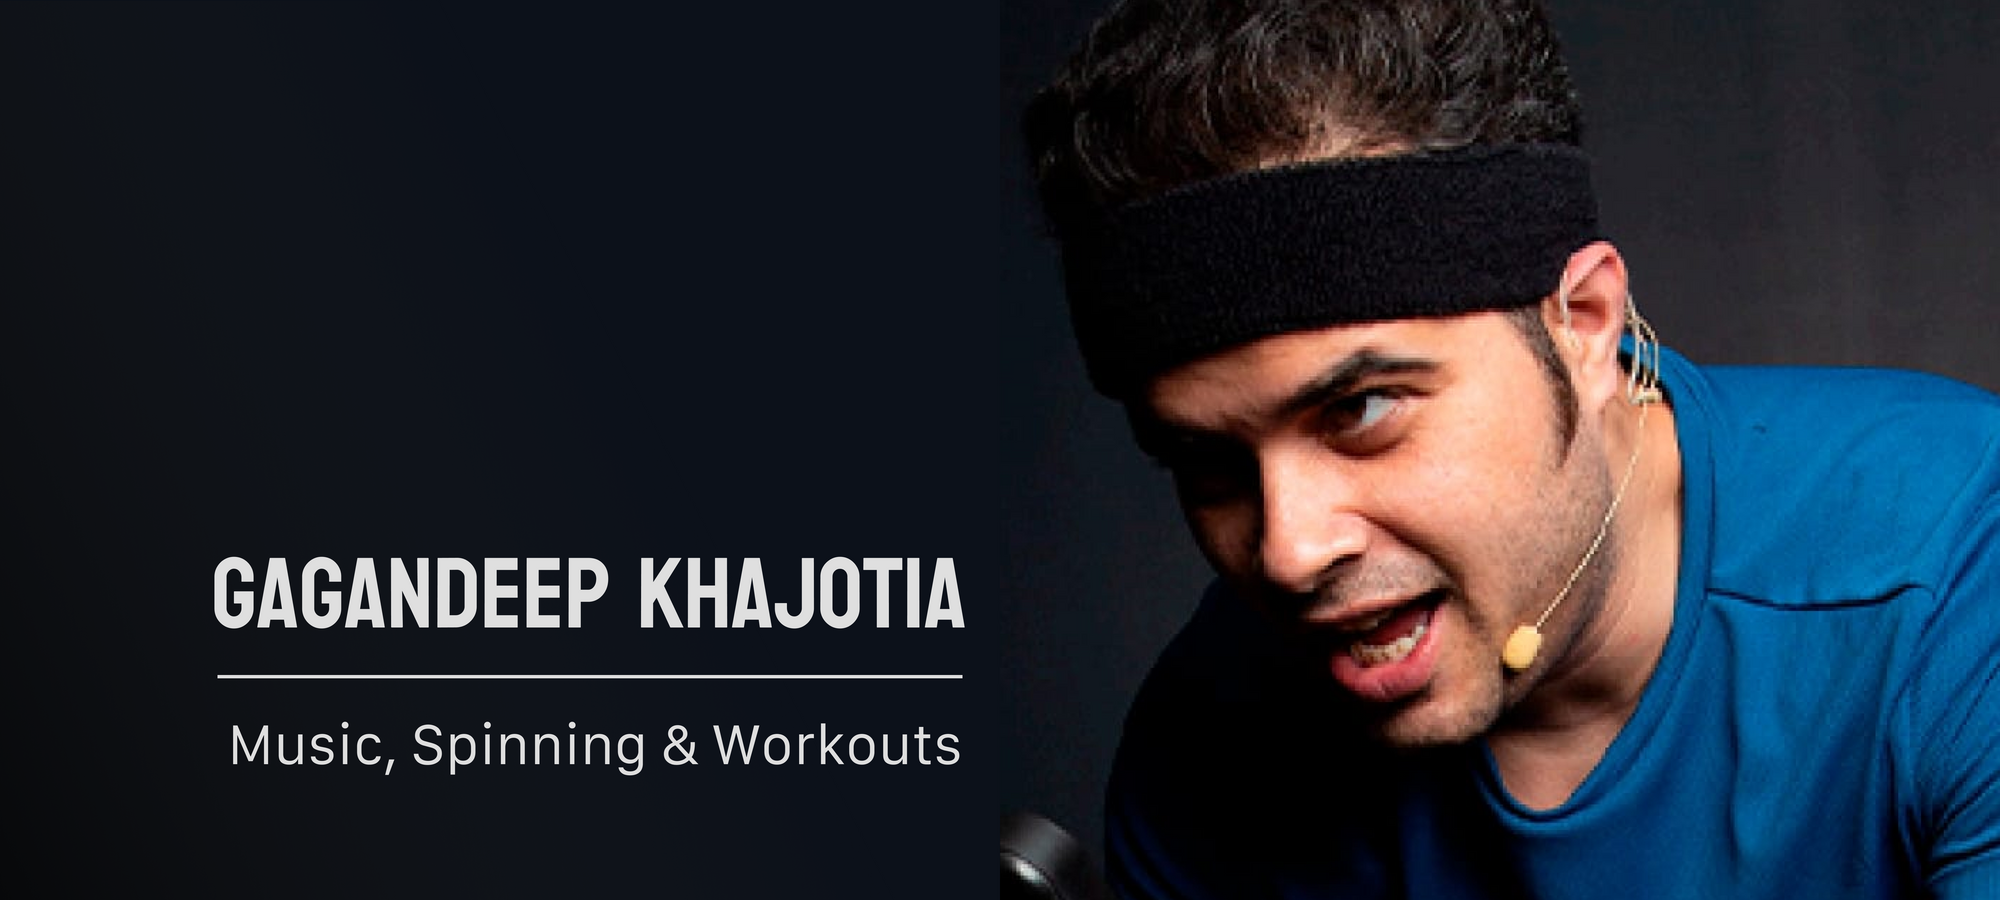 Gagandeep Khatojia: Returning to Fitness with a Win